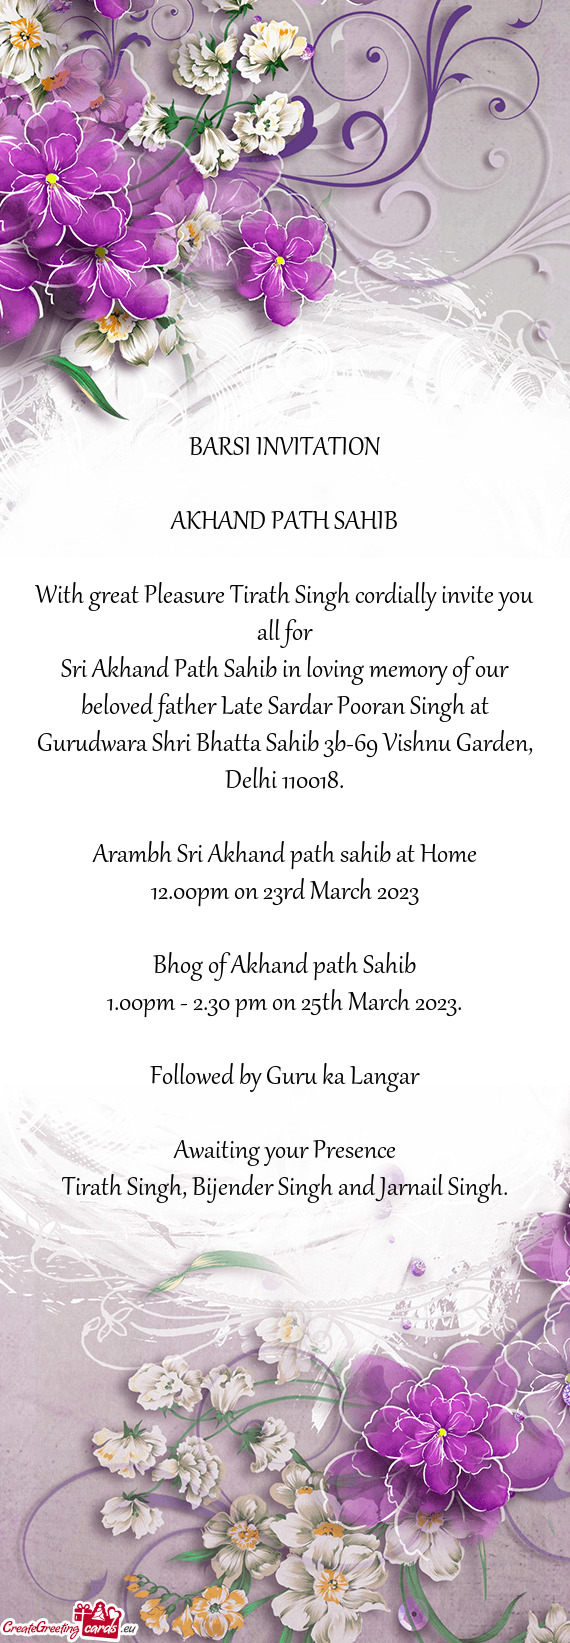 With great Pleasure Tirath Singh cordially invite you all for